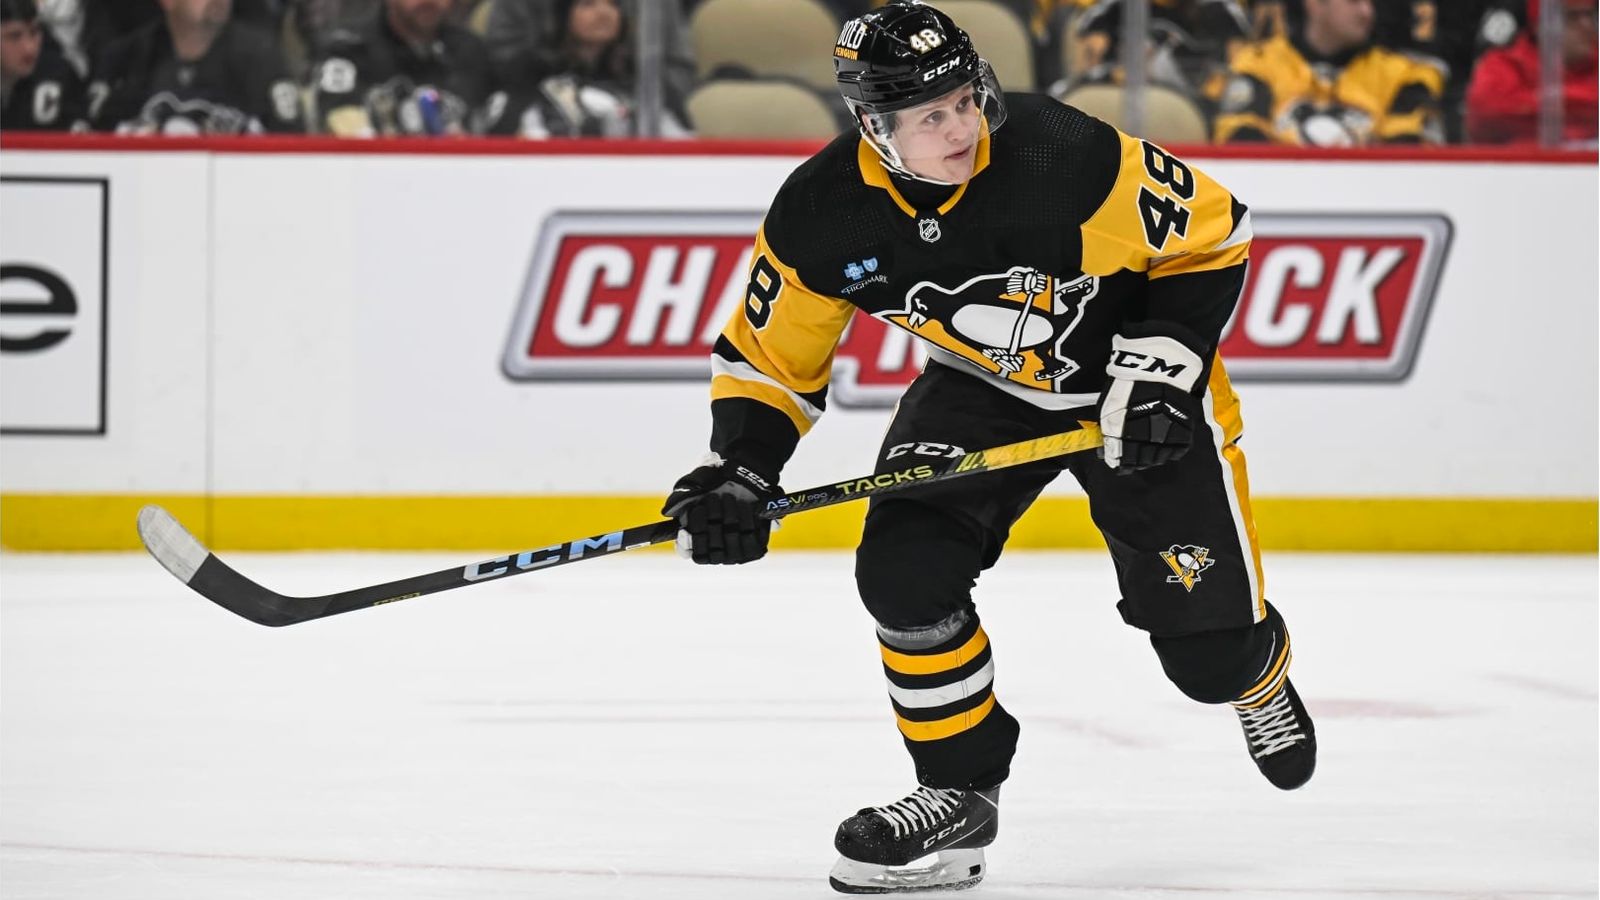 Drive to the Net: Should Valtteri Puustinen be on Penguins' power play?